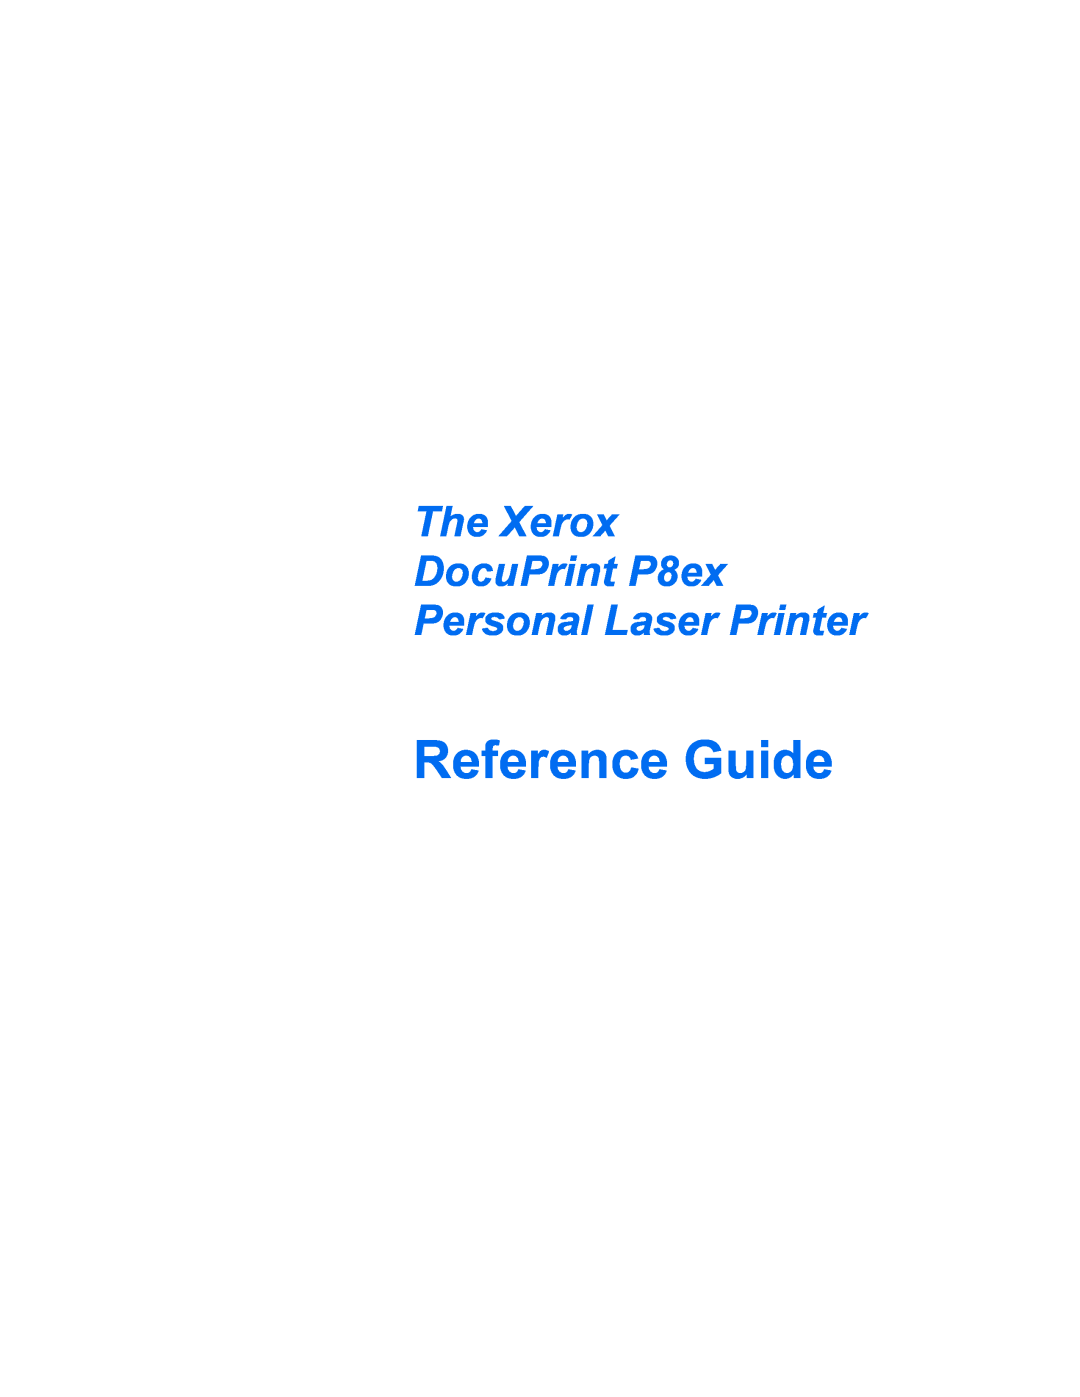 Xerox P8EX manual The Xerox DocuPrint P8ex Personal Laser Printer, Reference Guide 